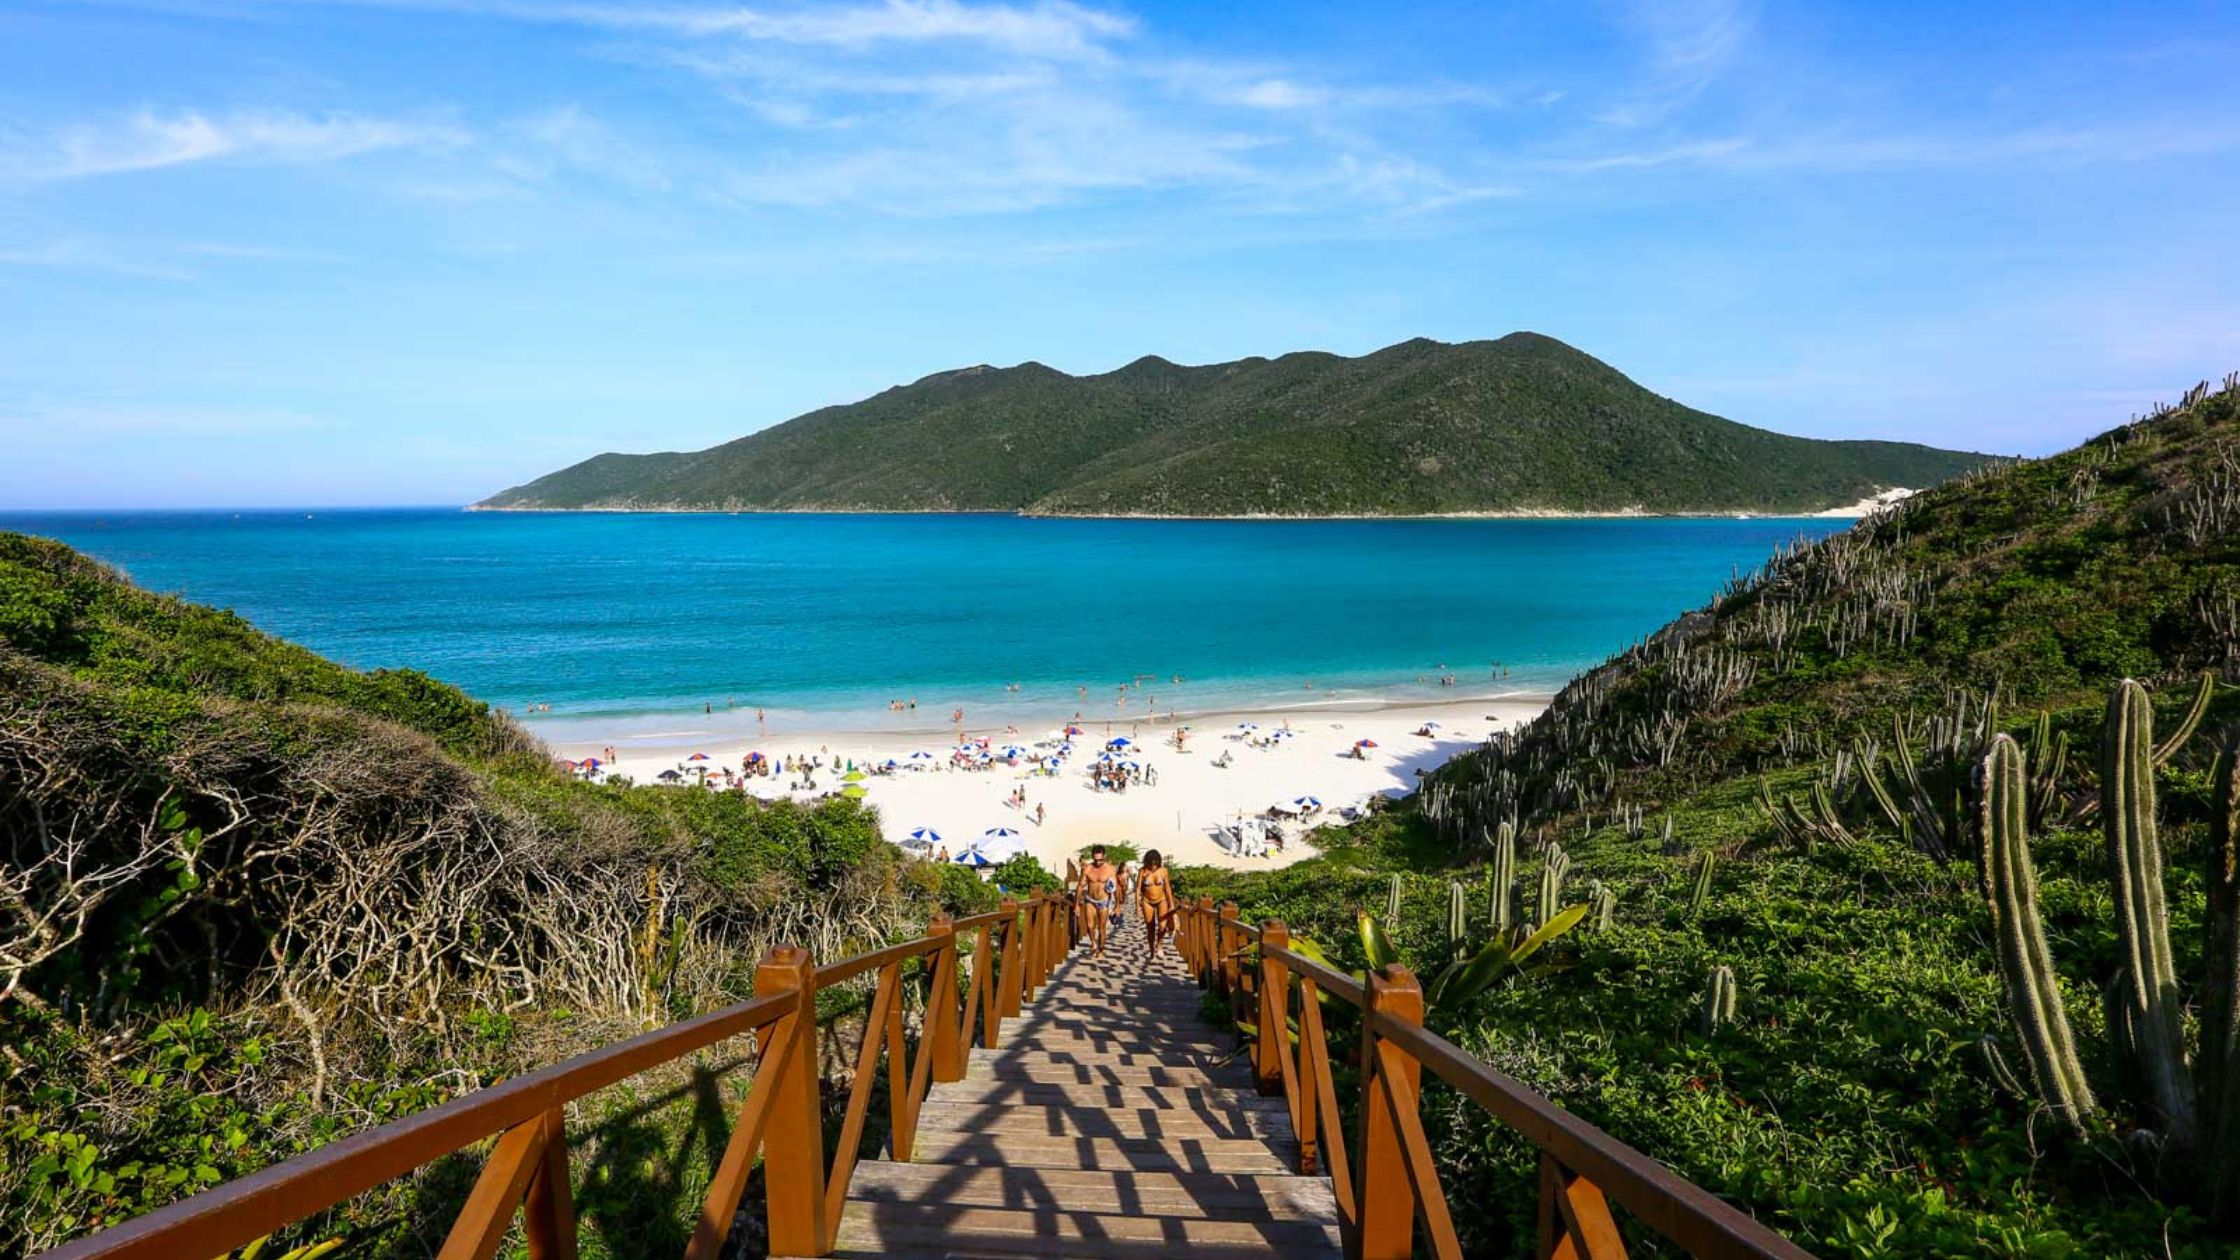 Pontal do Atalaia Beach Staircase, Arraial do Cabo Consider seeking support from your college or university's international office. Language can be a barrier, so inquire about language courses or support services available to help you learn Portuguese and navigate Brazilian culture.